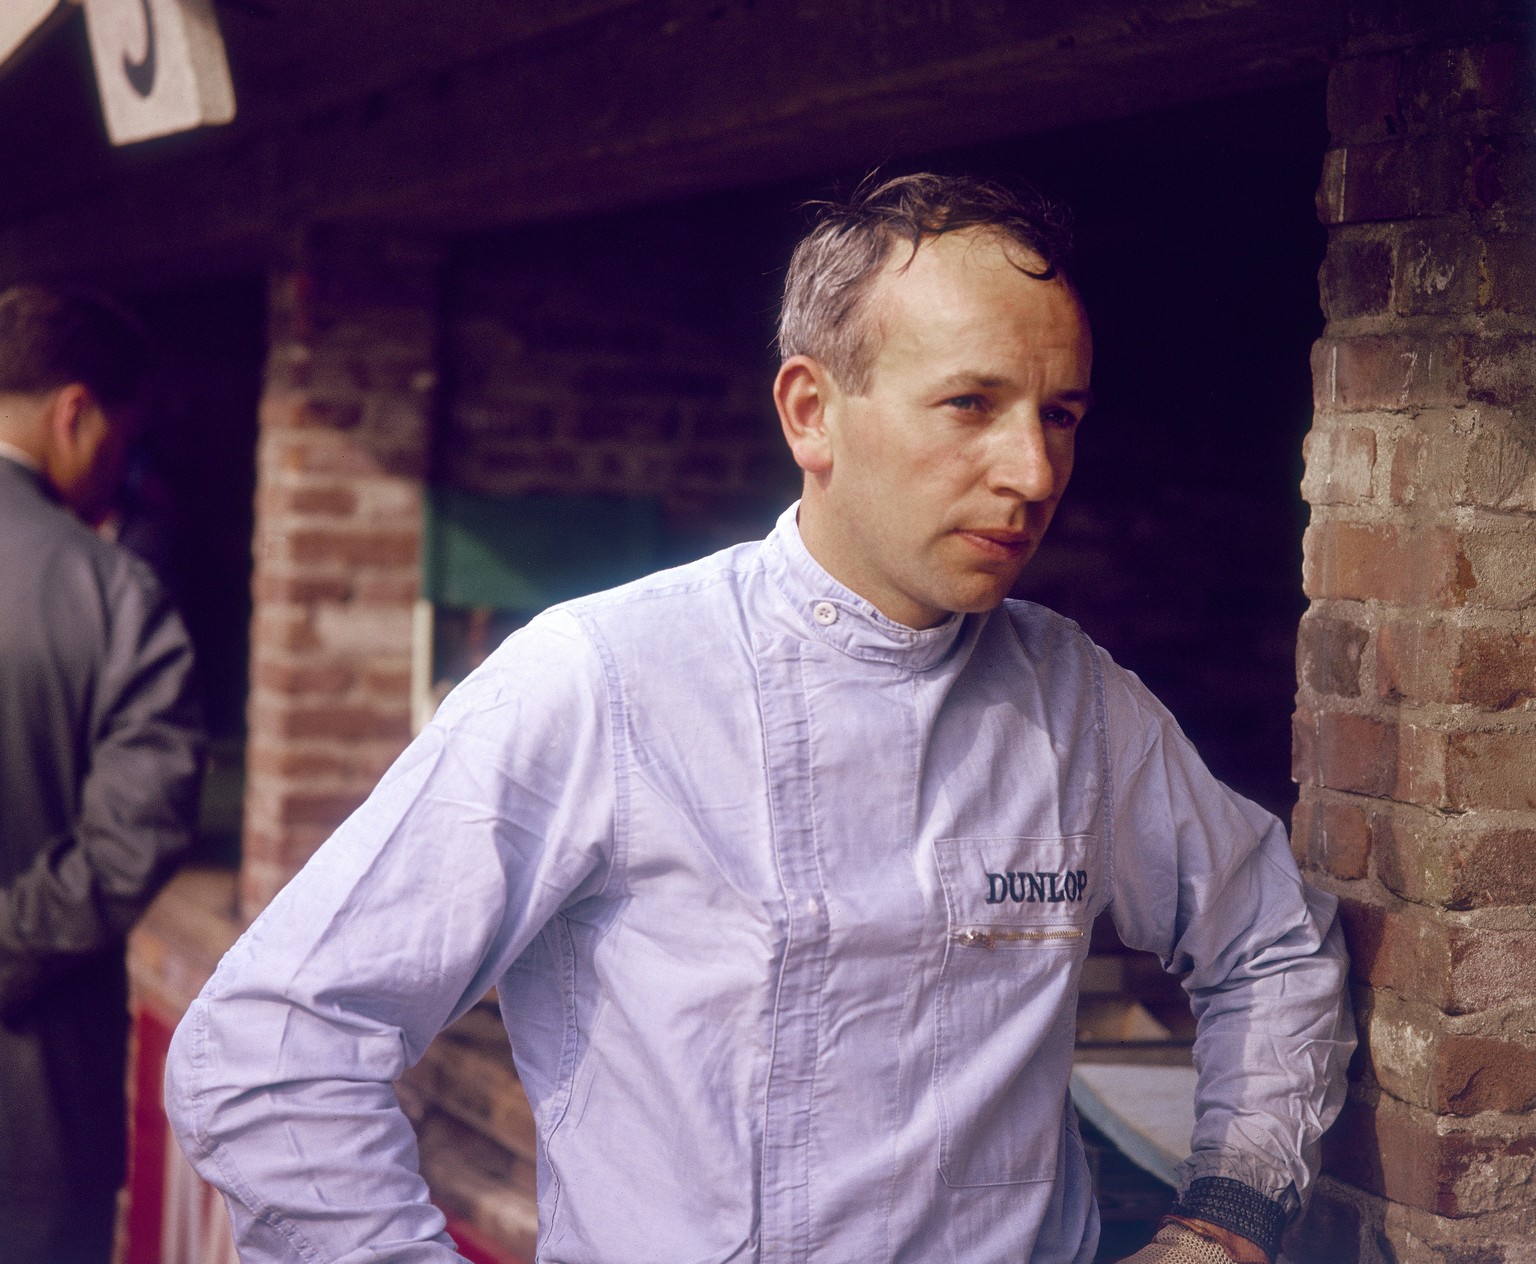 John Surtees. John Surtees came to car racing in 1959 after a highly successful motorcycle racing career. He drove in Formula 1 from 1960 to 1972, winning 6 races and becoming World Champion in 1964 w ...